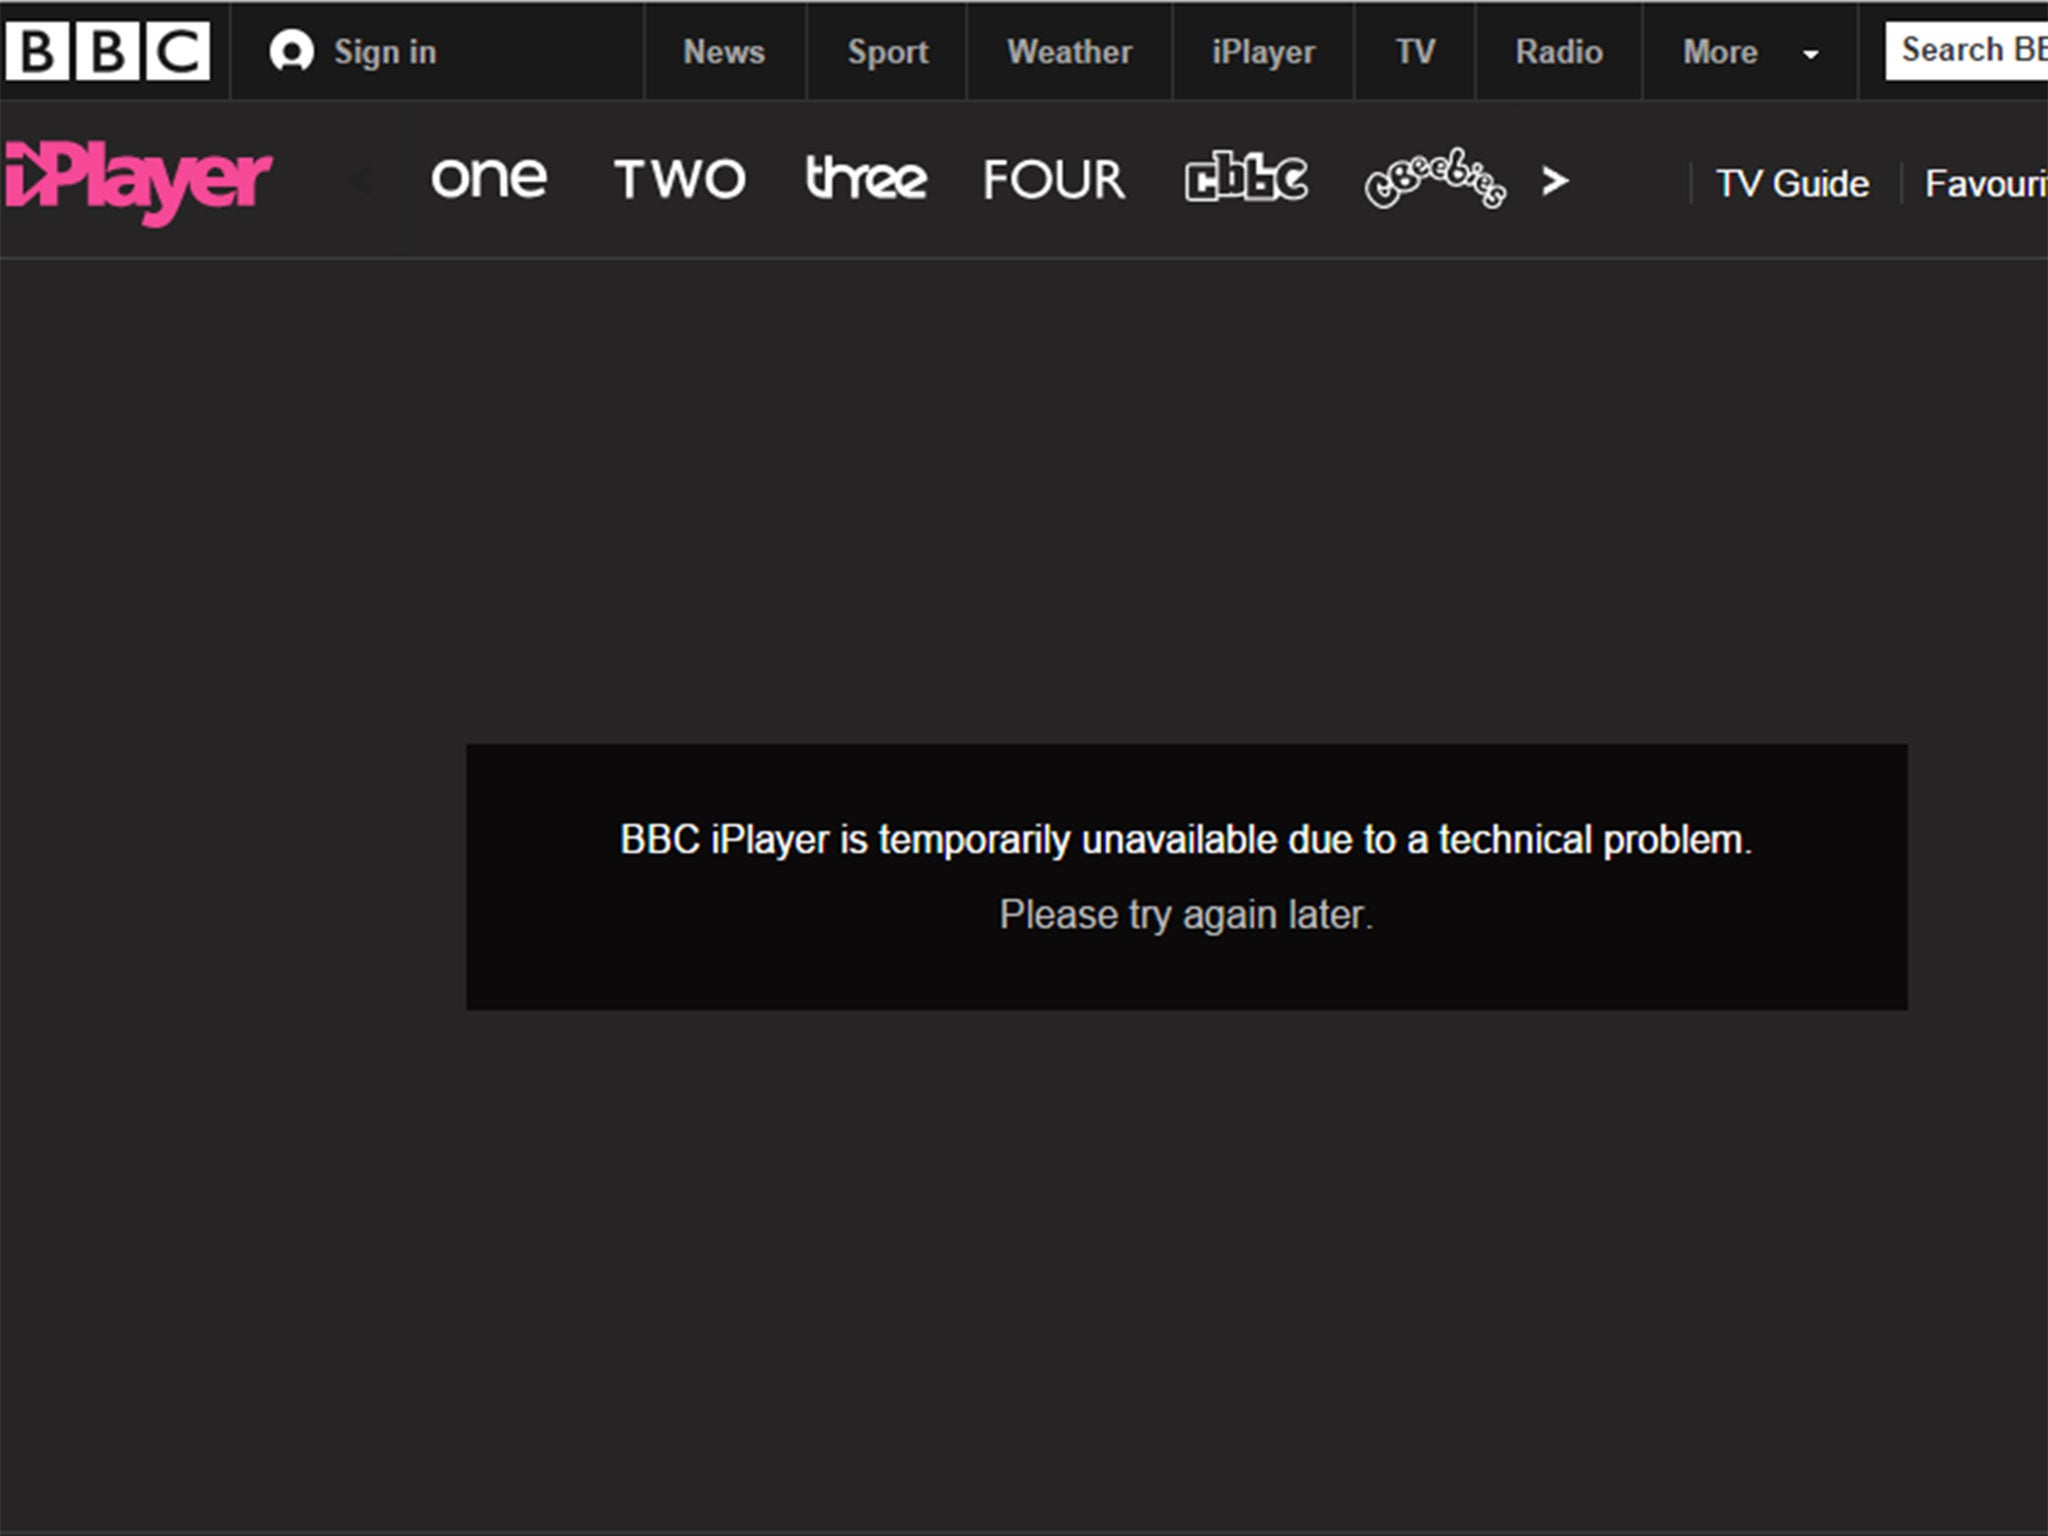 The BBC's iPlayer service was down on Thursday evening